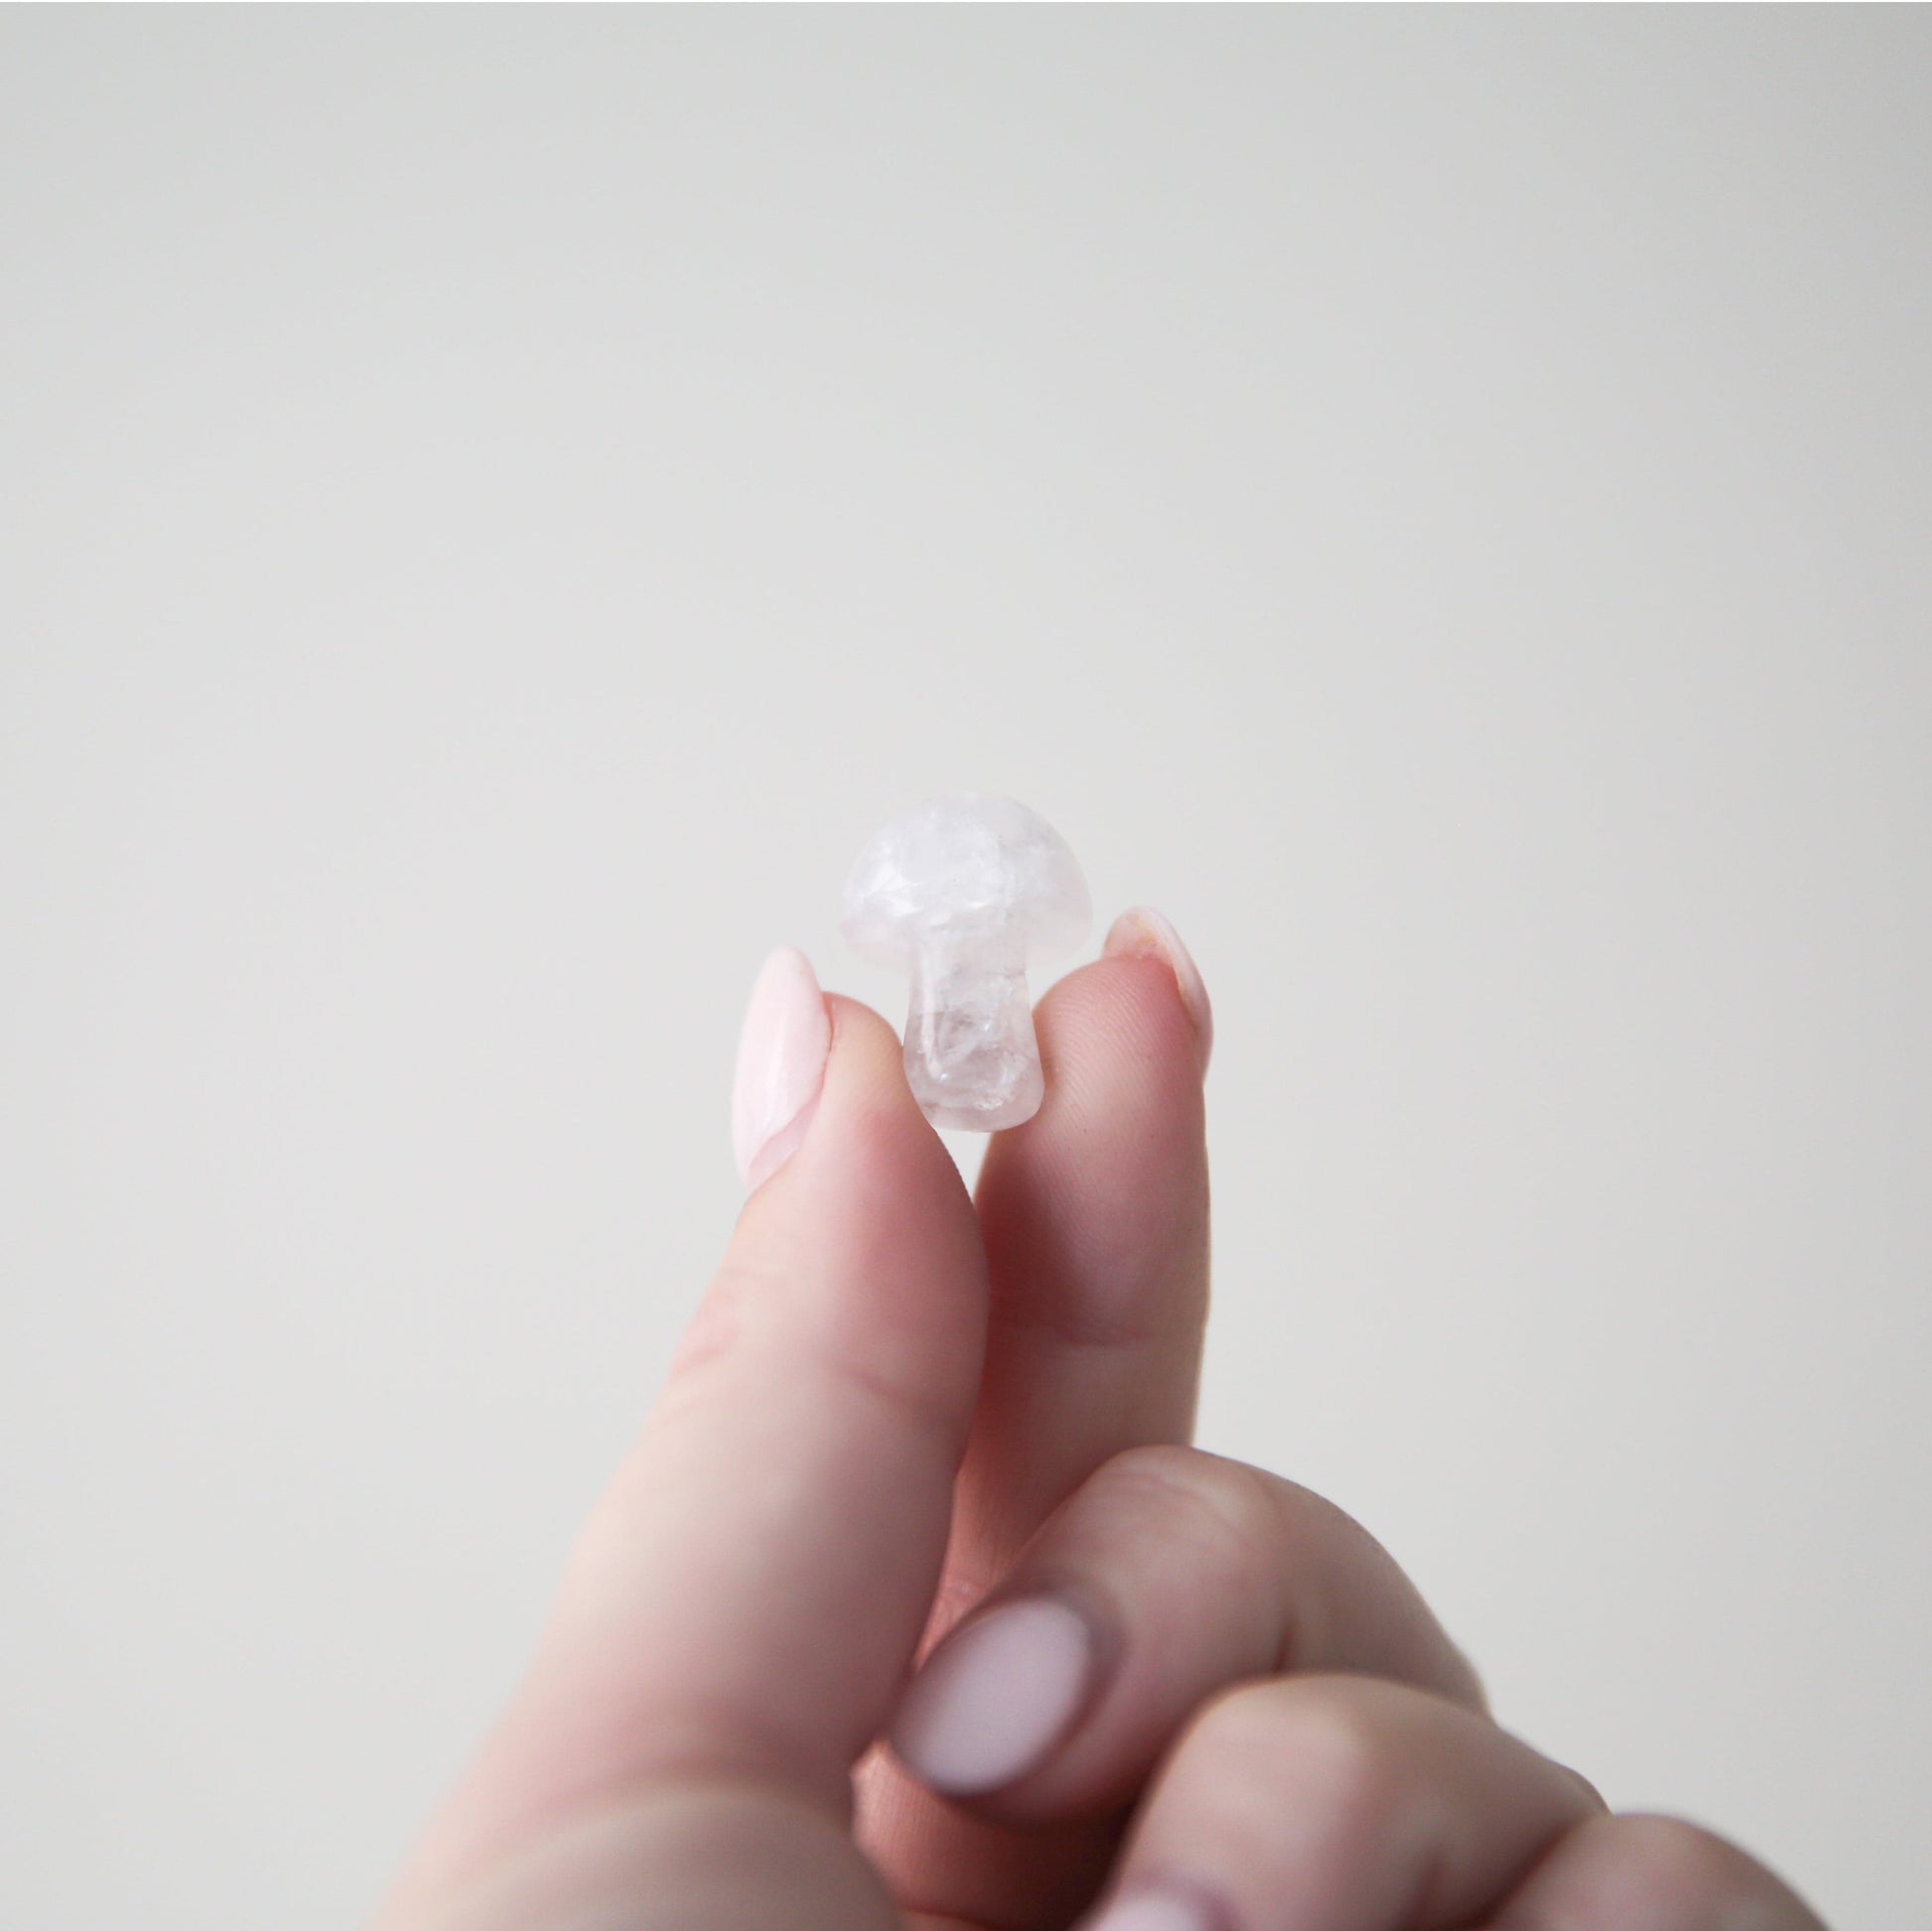 On a light grey background is a model holding a white quartz crystals in the shape of a tiny mushroom.